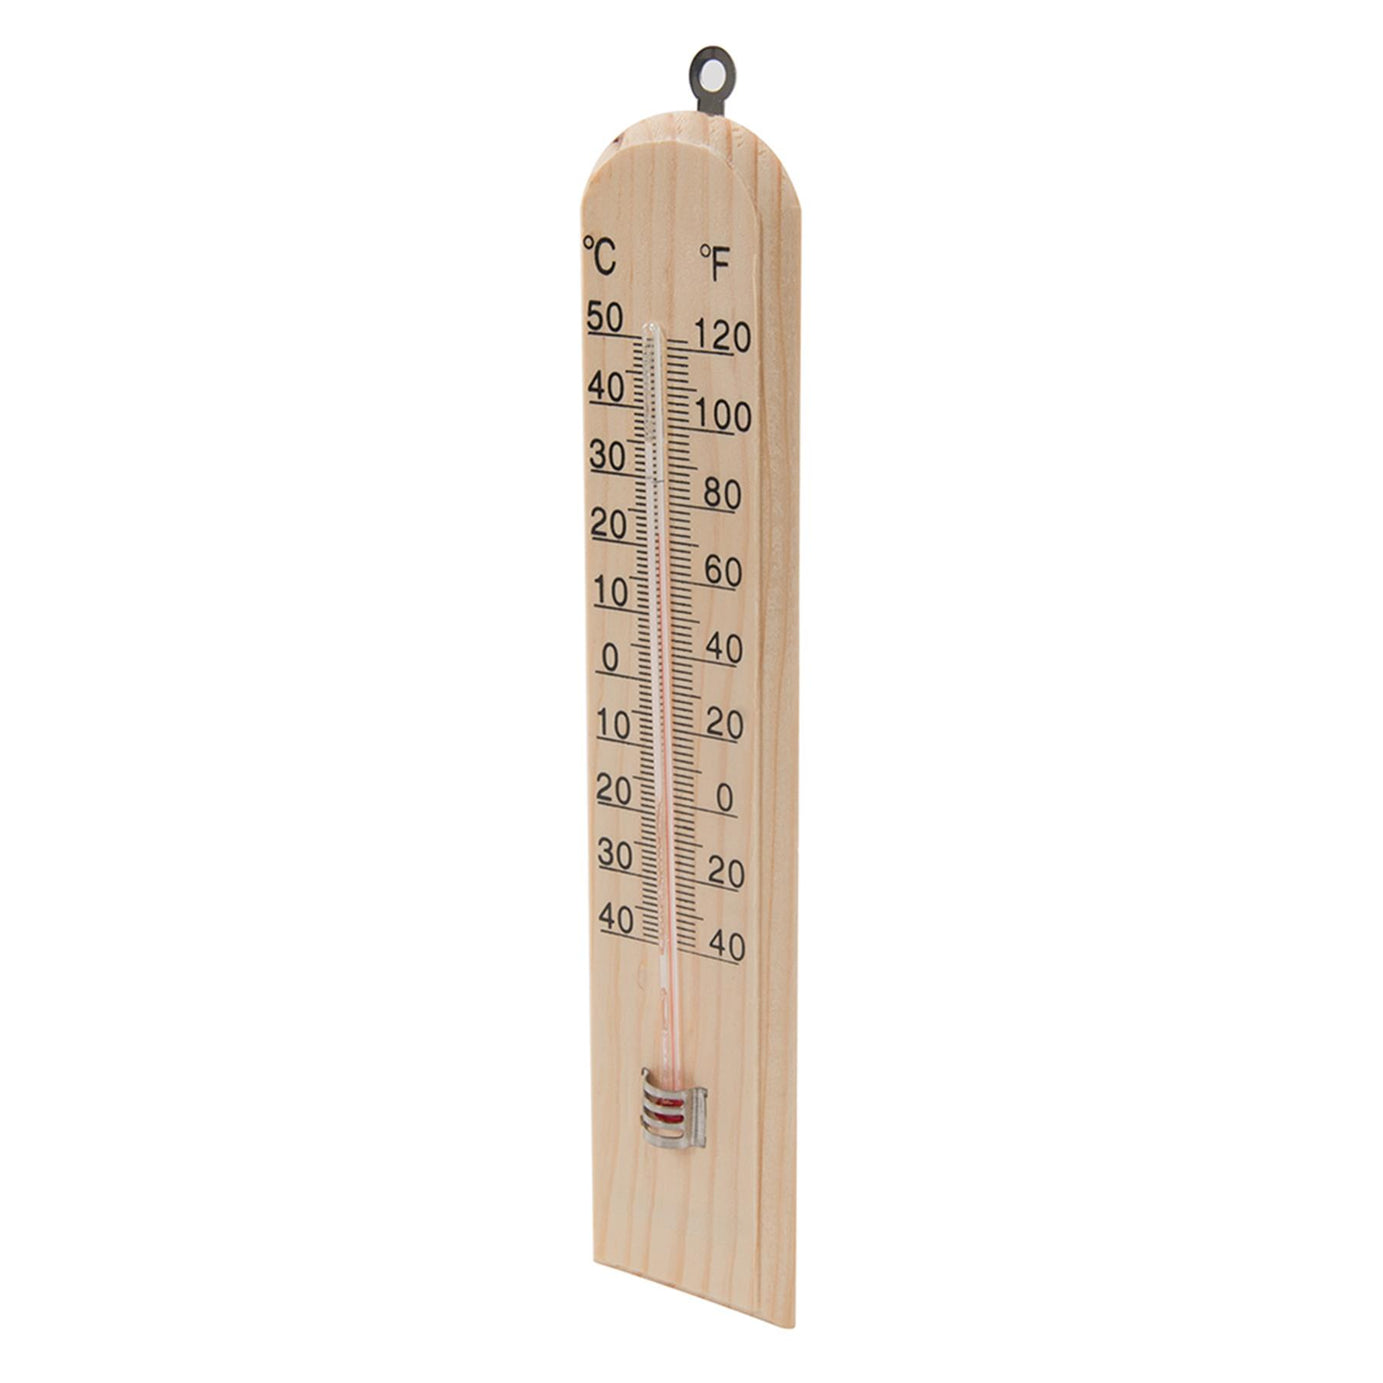 Wooden Thermometer -40° To °C Celsius And Fahrenheit Temperature Scale